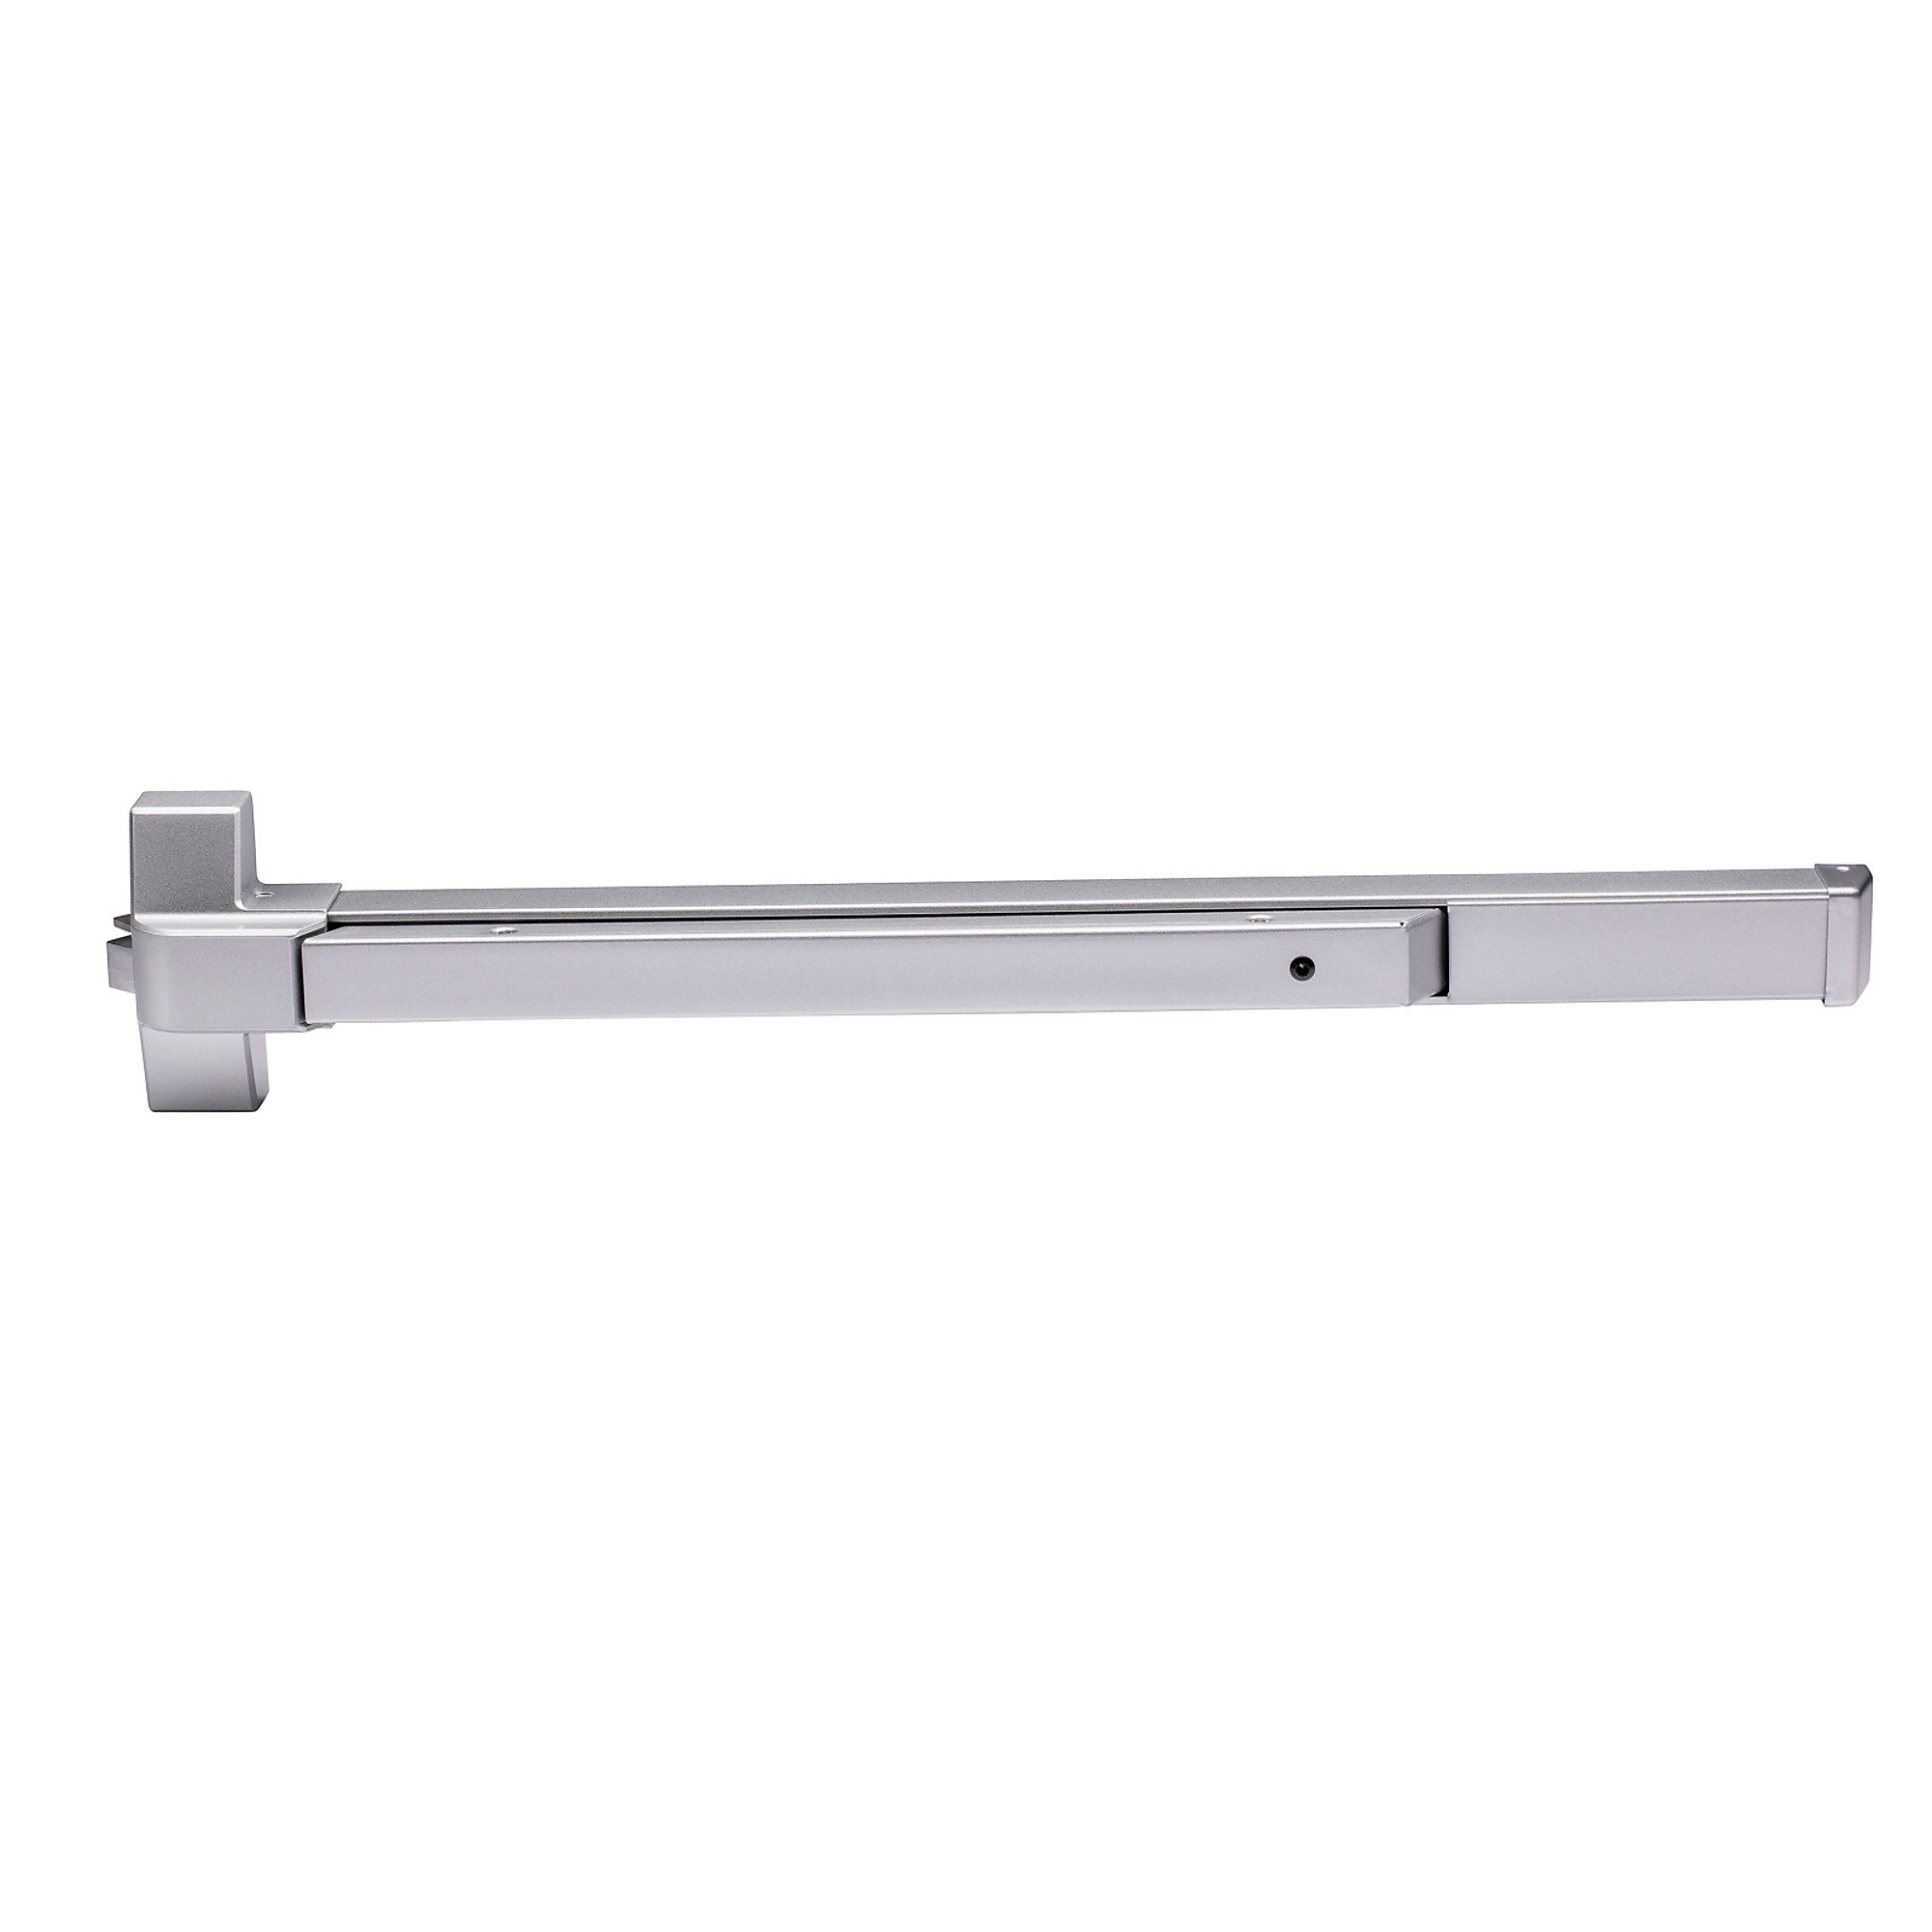 Global Door Controls, Grade 2 Commercial 36Inch Fire Rated Touch Bar Exit Device, Max. Fits Door Width 36 in, MInch Fits Door Width 30 in, Model